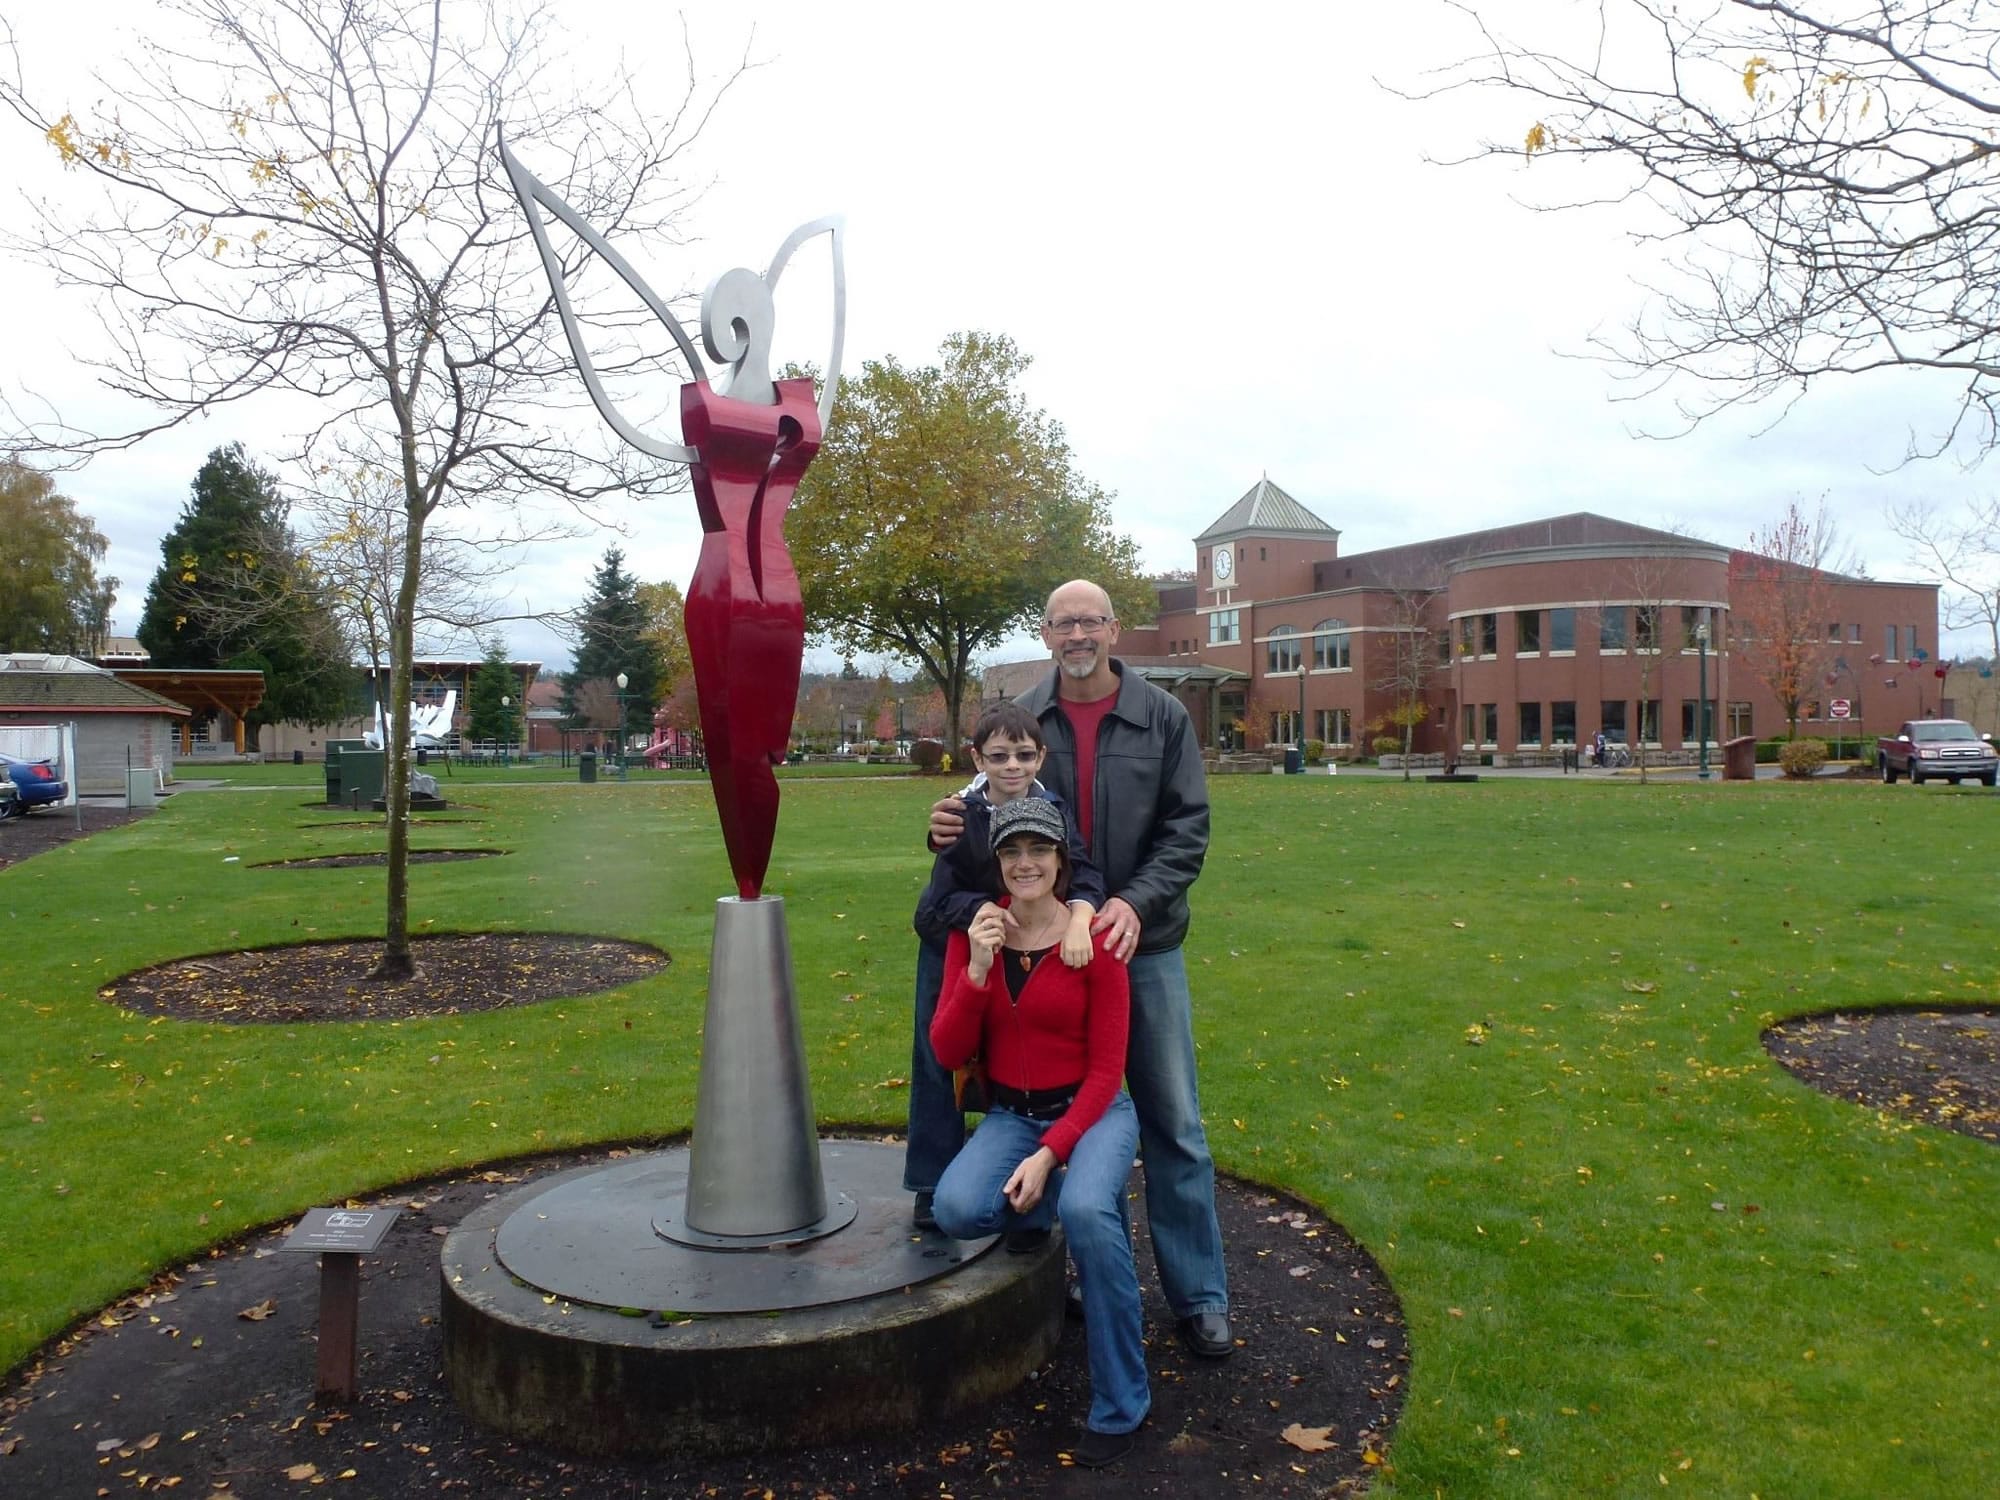 Jennifer Corio and David Frei created the sculpture &quot;Rise,&quot; which won the People's Choice Award from Puyallup's Arts Downtown organization.